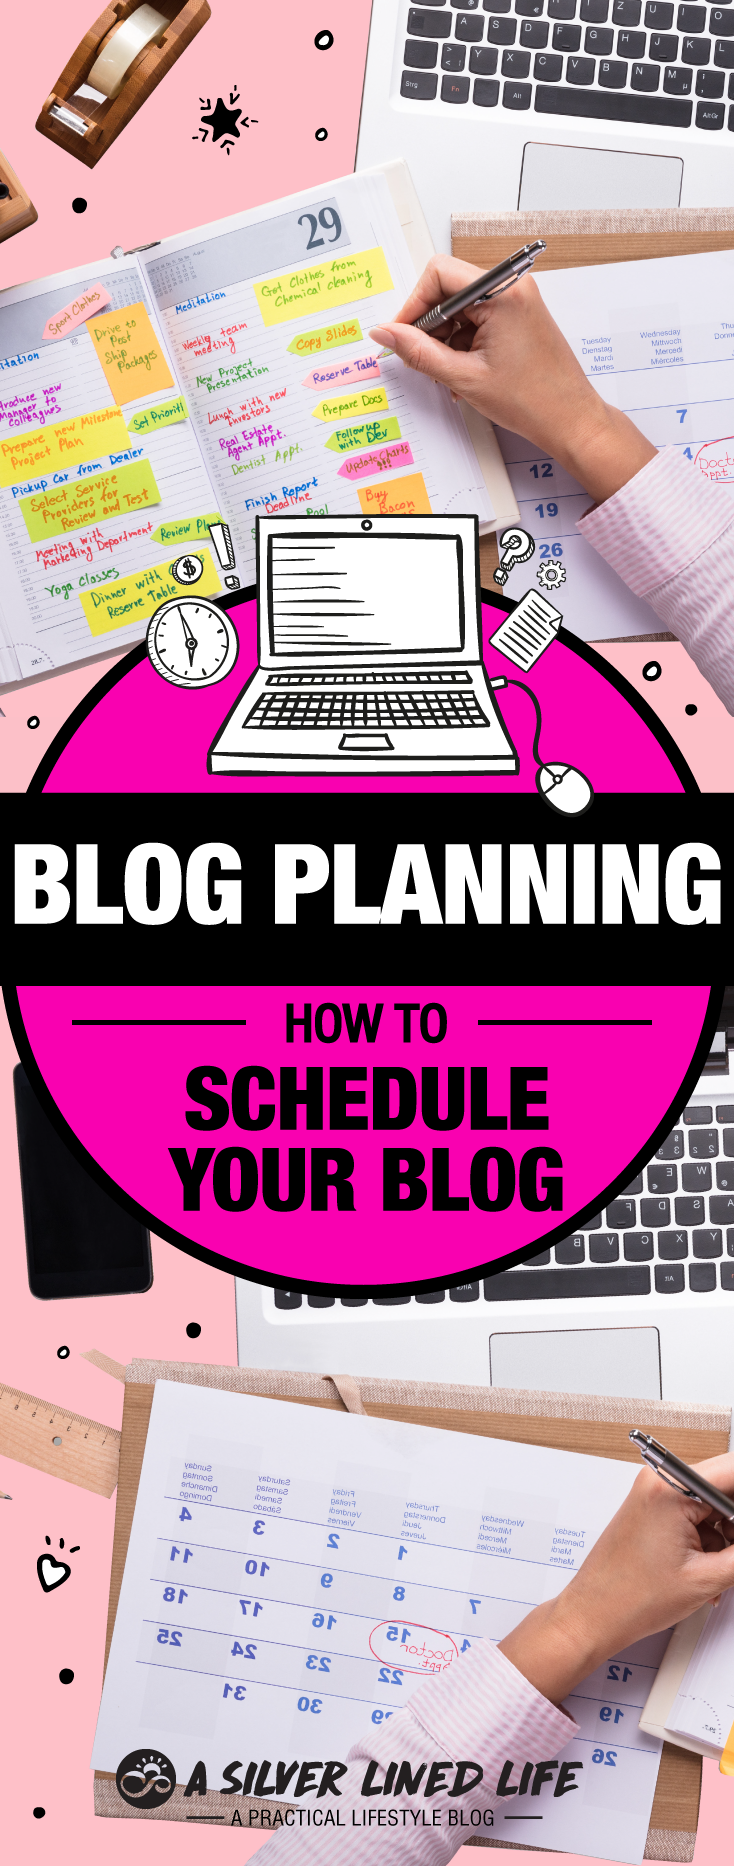 Blog Planning 101: How To Schedule Your Blog - For beginners to advanced bloggers including ideas, a calendar, planner, worksheet and an awesome template. When starting a blog we design it with many ideas and great inspiration but often overlook a blog planner or blog schedule. If your blogging for money, lifestyle, have great topics or posts, you need a plan with a template, daily routines, weekly goals, a calendar, organized posts and ideas as well as structured social media. This website has a spreadsheet link, product and tools that will allow you to track and manage your blog. #SLL